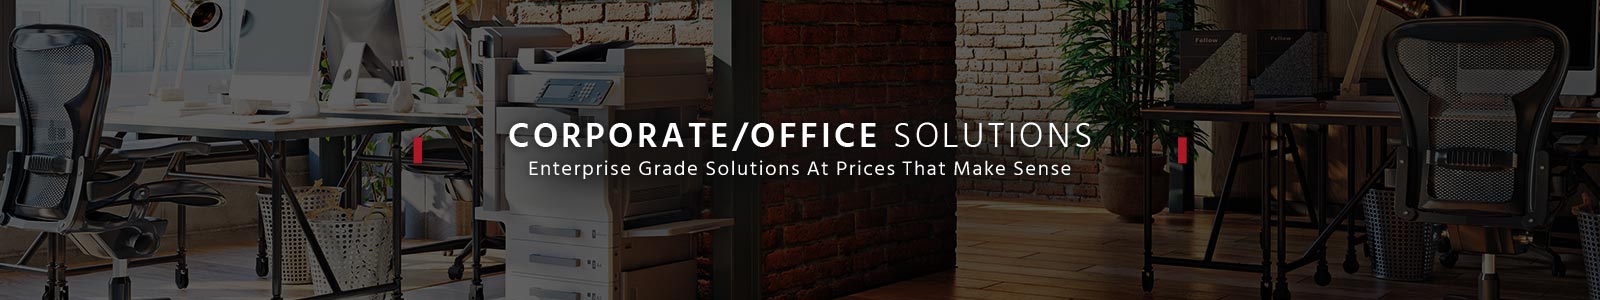 Corporate/Office Solutions
Enterprise Grade Solutions At Prices That Make Sense
Shop Now